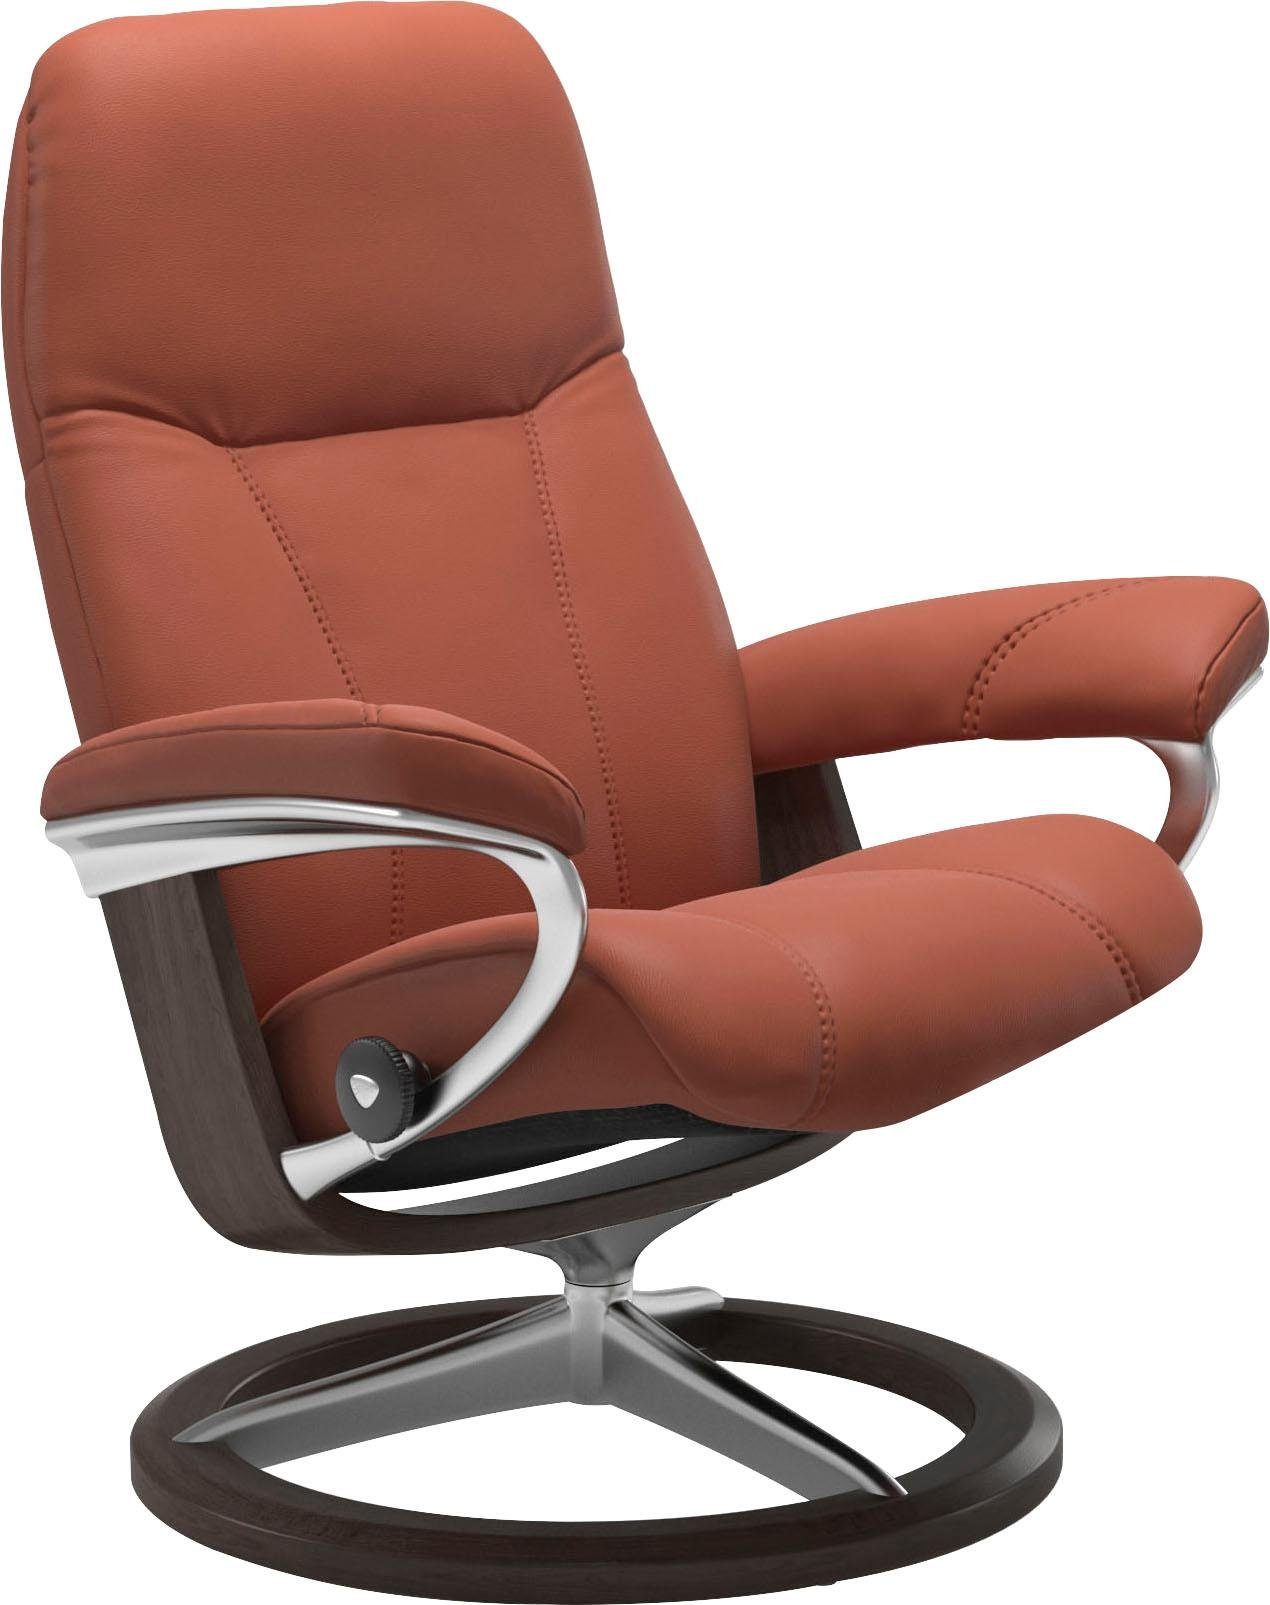 Stressless® Relaxsessel Consul, mit Signature Base, Größe L, Gestell Wenge